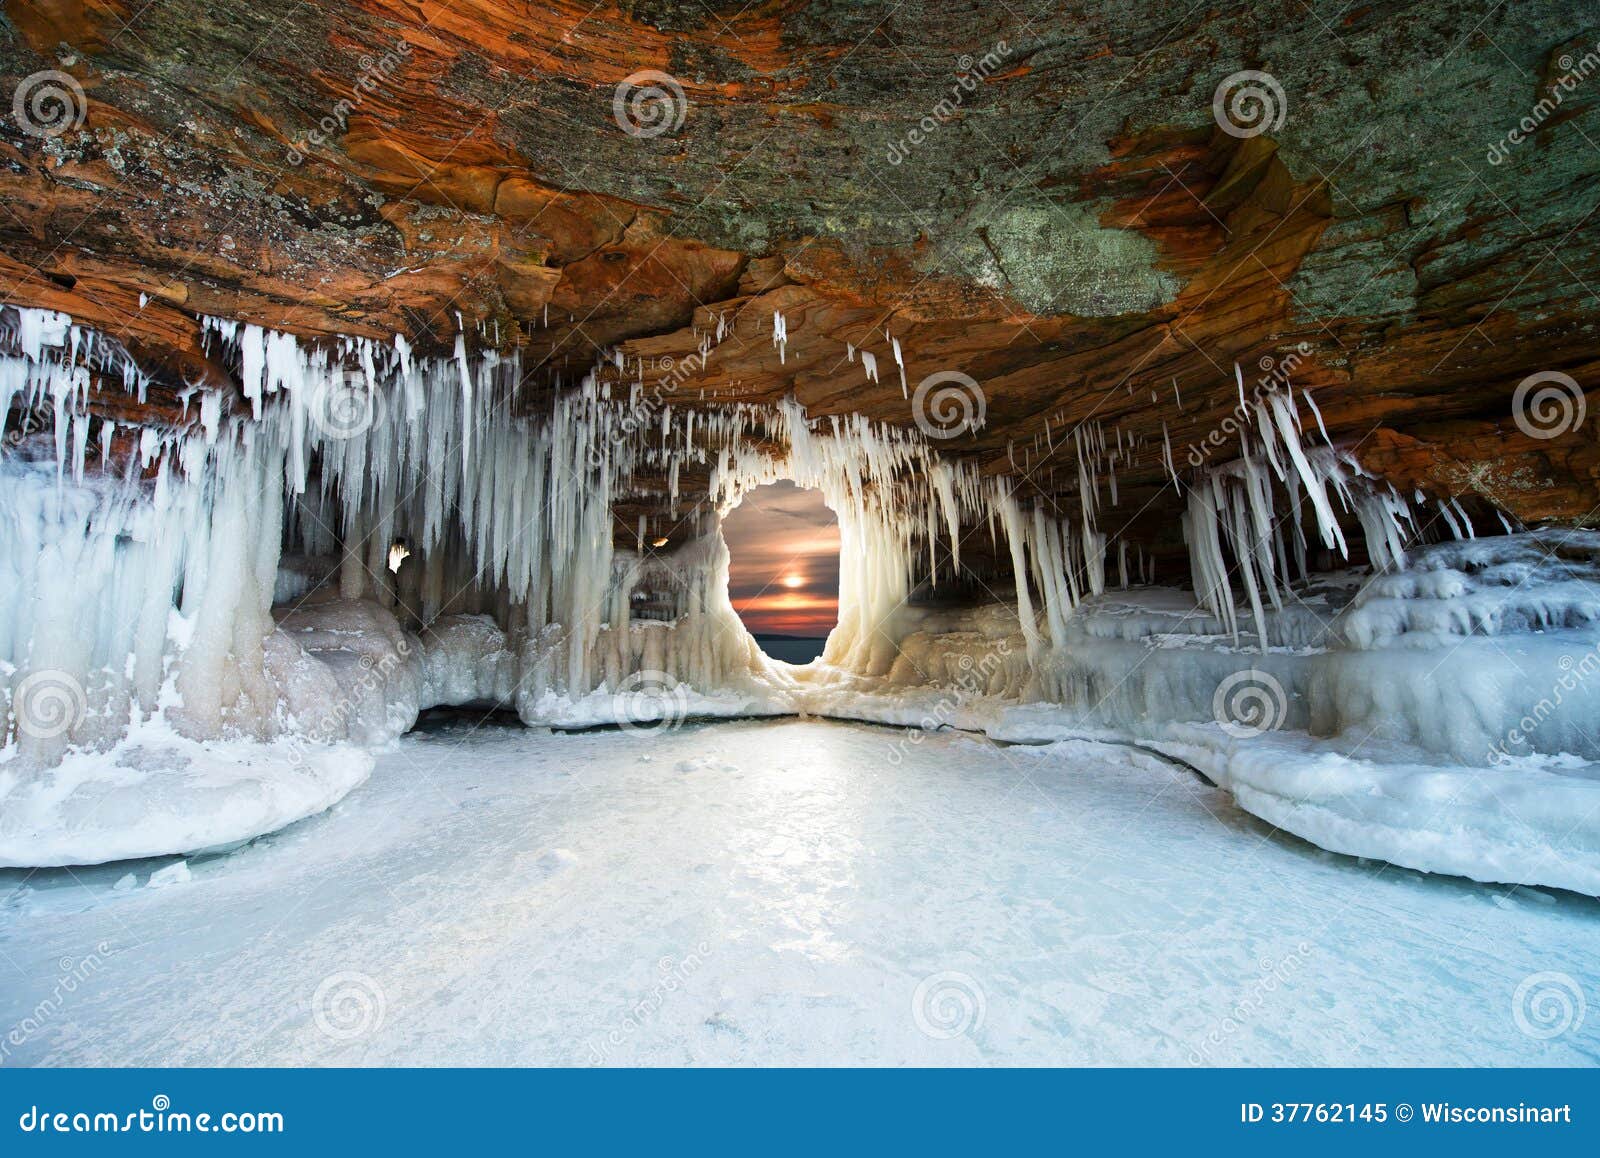 ice caves at apostle islands, winter sunset